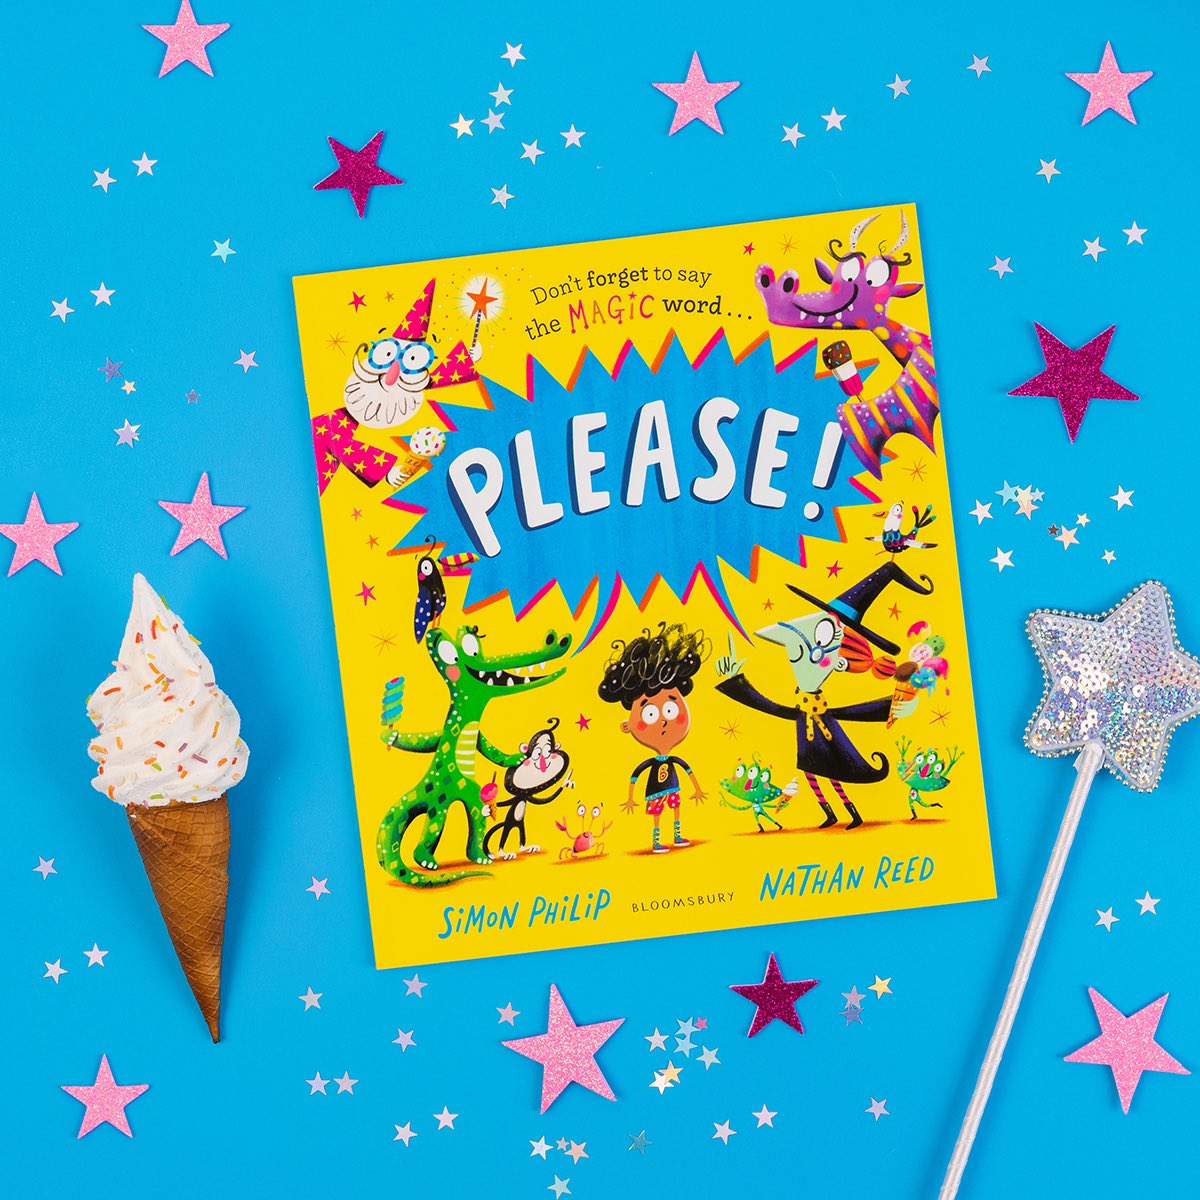 Picture Book: PLEASE! by Simon Philip @siphilipstories and illustrated by Nathan Reed @NathanReed_Illo 🍦